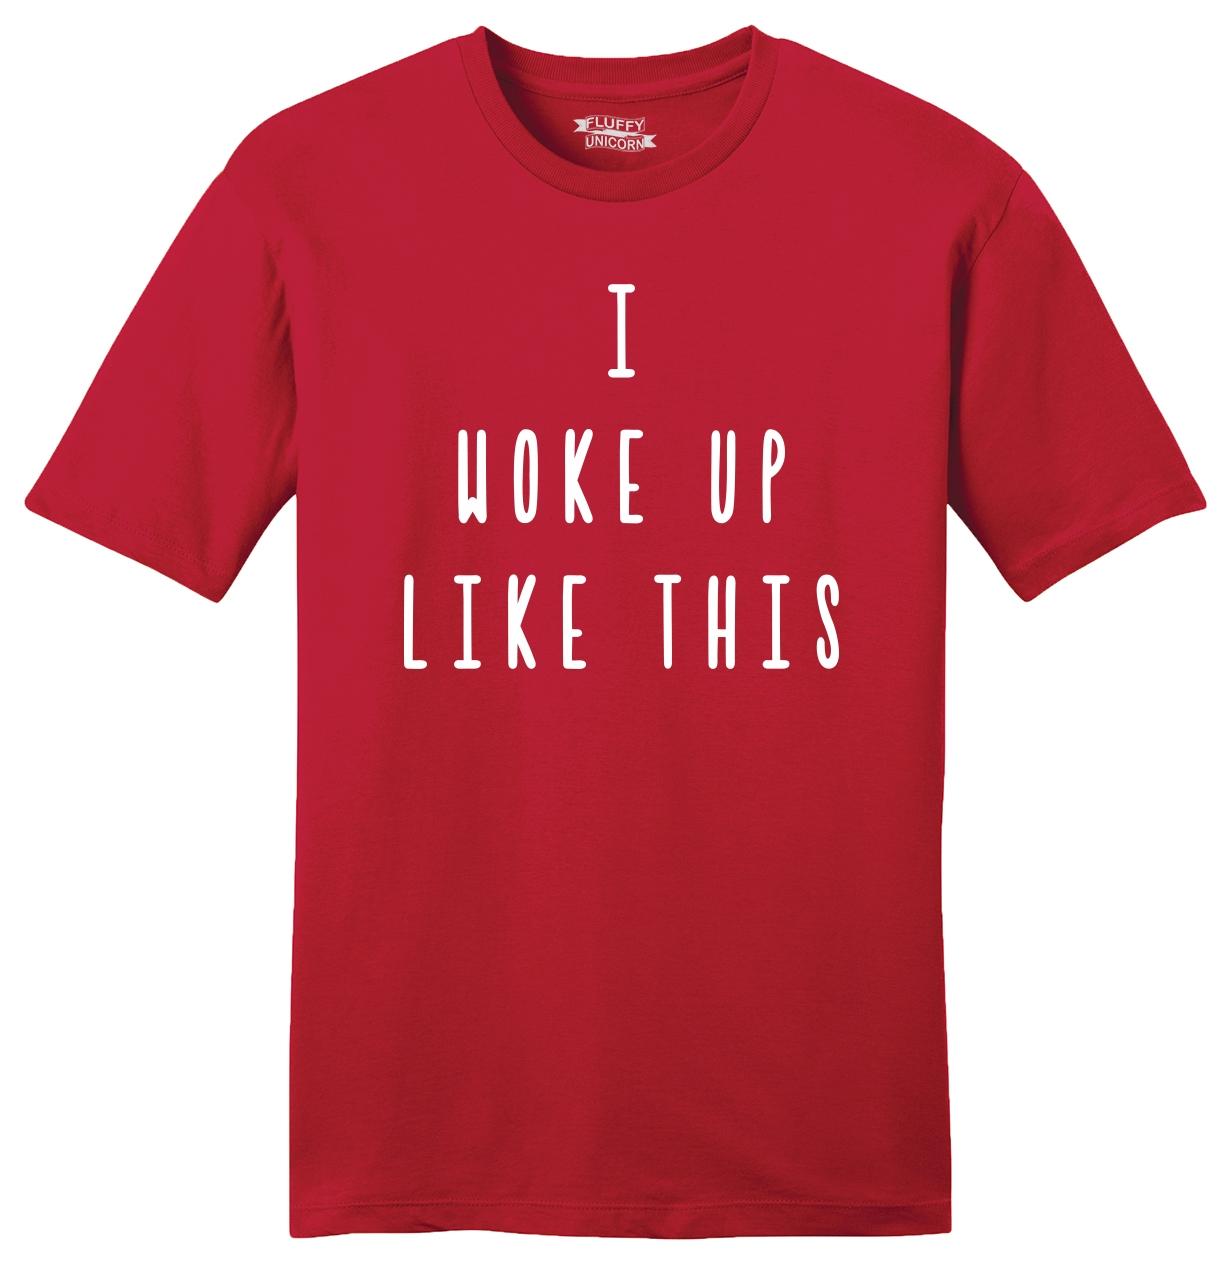 I Woke Up Like This Cool Funny Hipster Swag Unisex T-Shirt Job Lot x50 